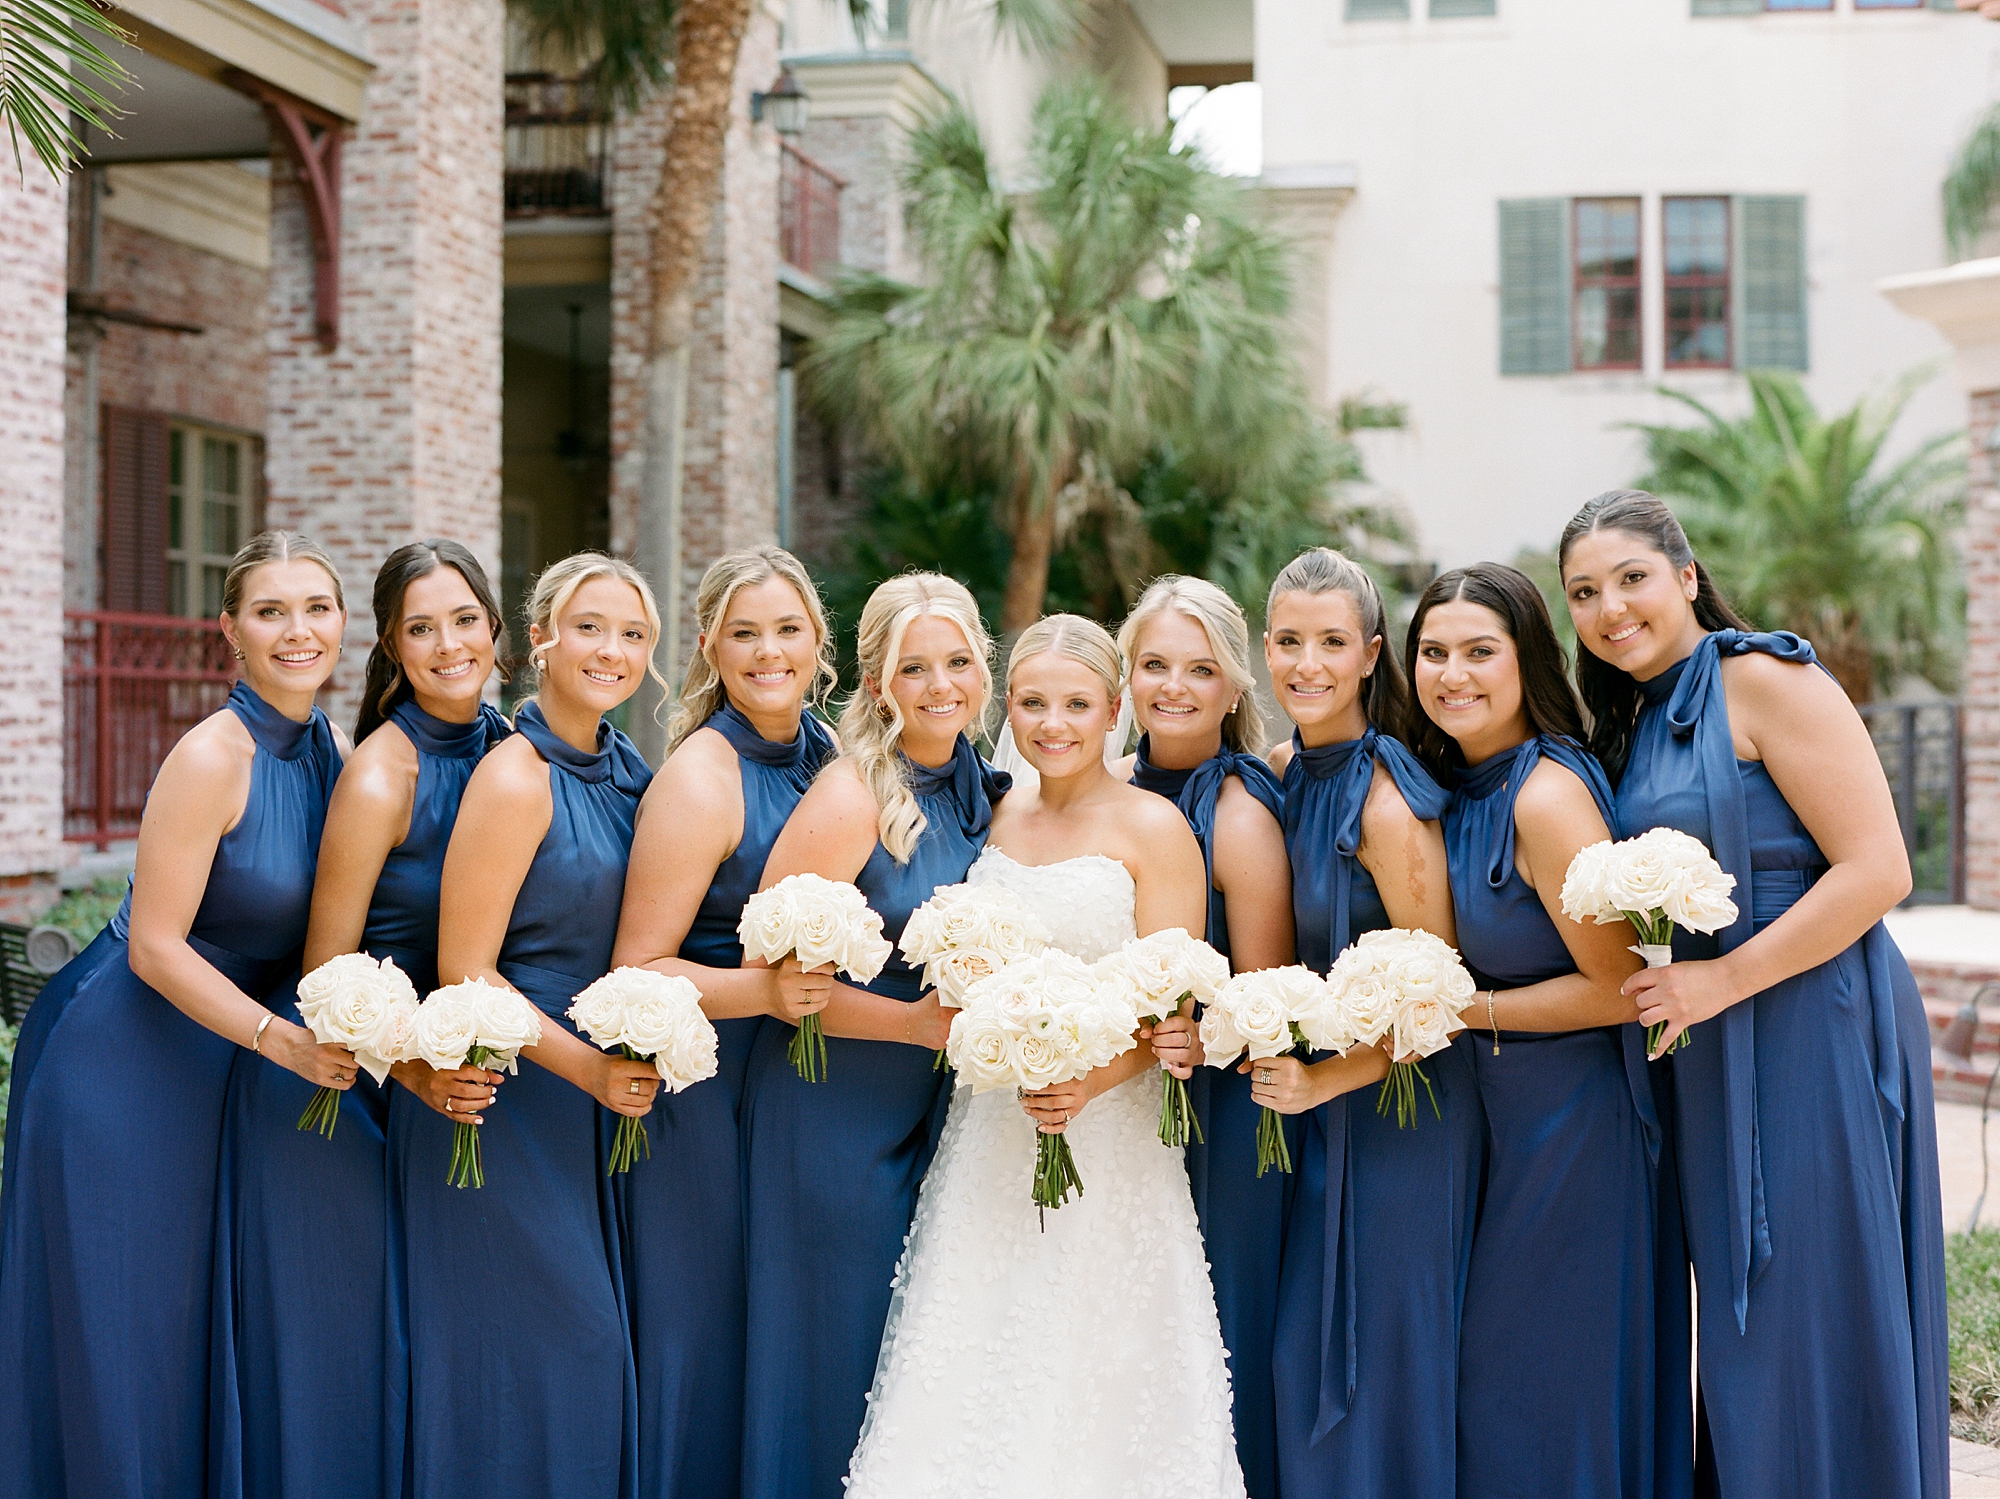 9 bridesmaids in one-shouldered blue dresses hold bouquets of white flowers next to bride 